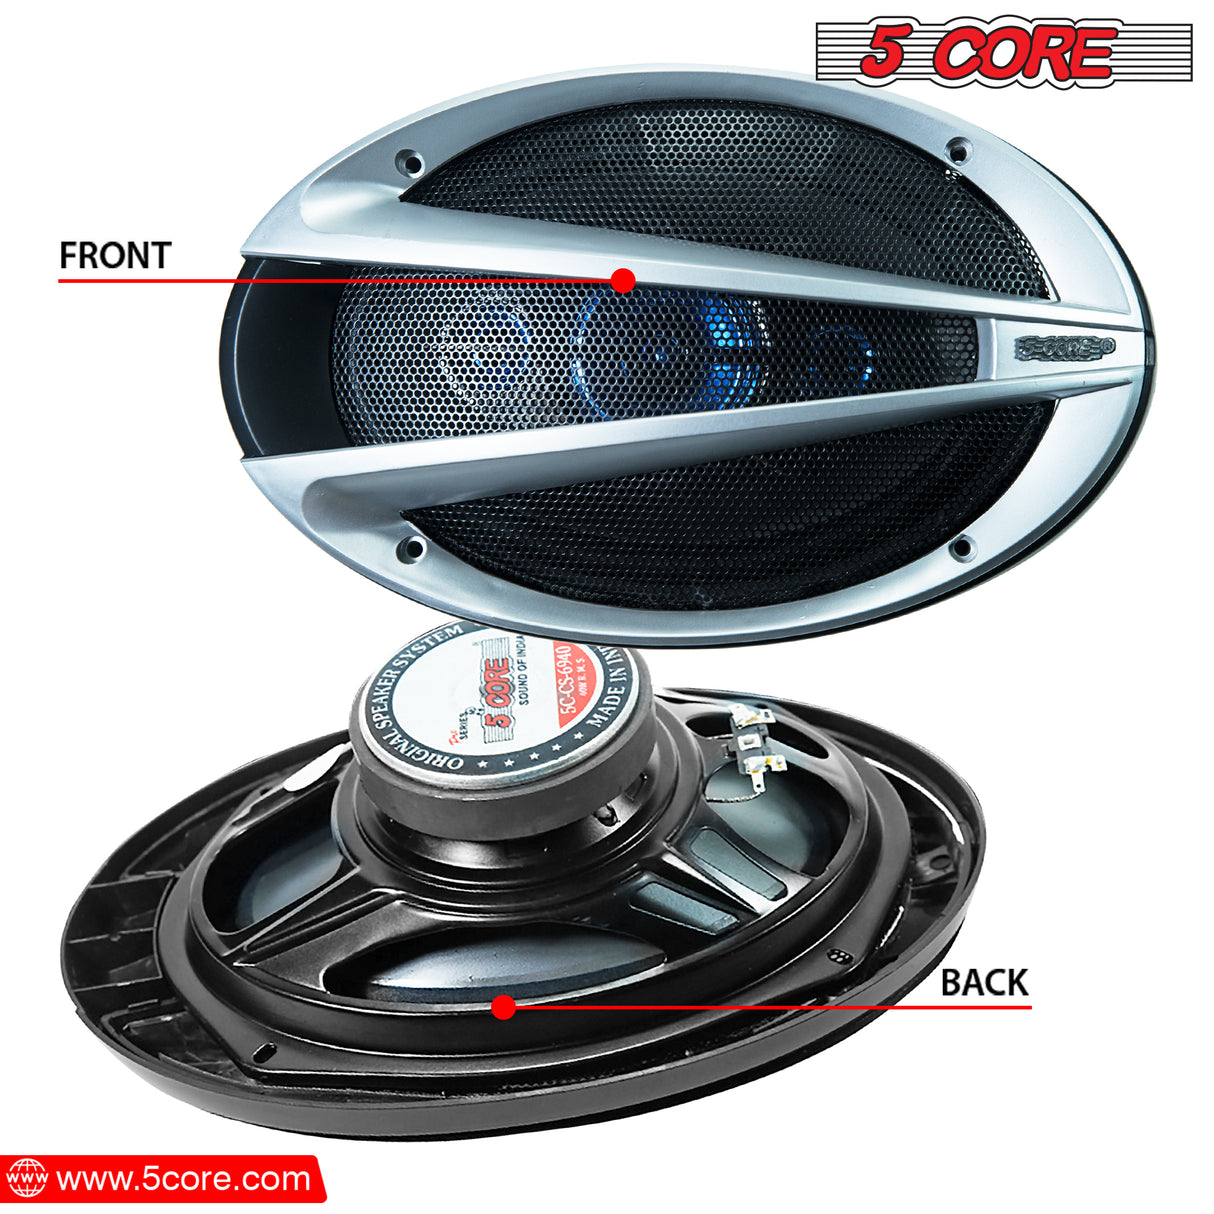 5 Core 6x9 Speakers Car Audio Black 4 Pack| 1100W Coaxial Speakers Car Audio with 100 MM Magnet, 4 Ohm | Professional 6x9 Speaker for Car Audio, Door Speakers- CS-69-40 2 PAIR